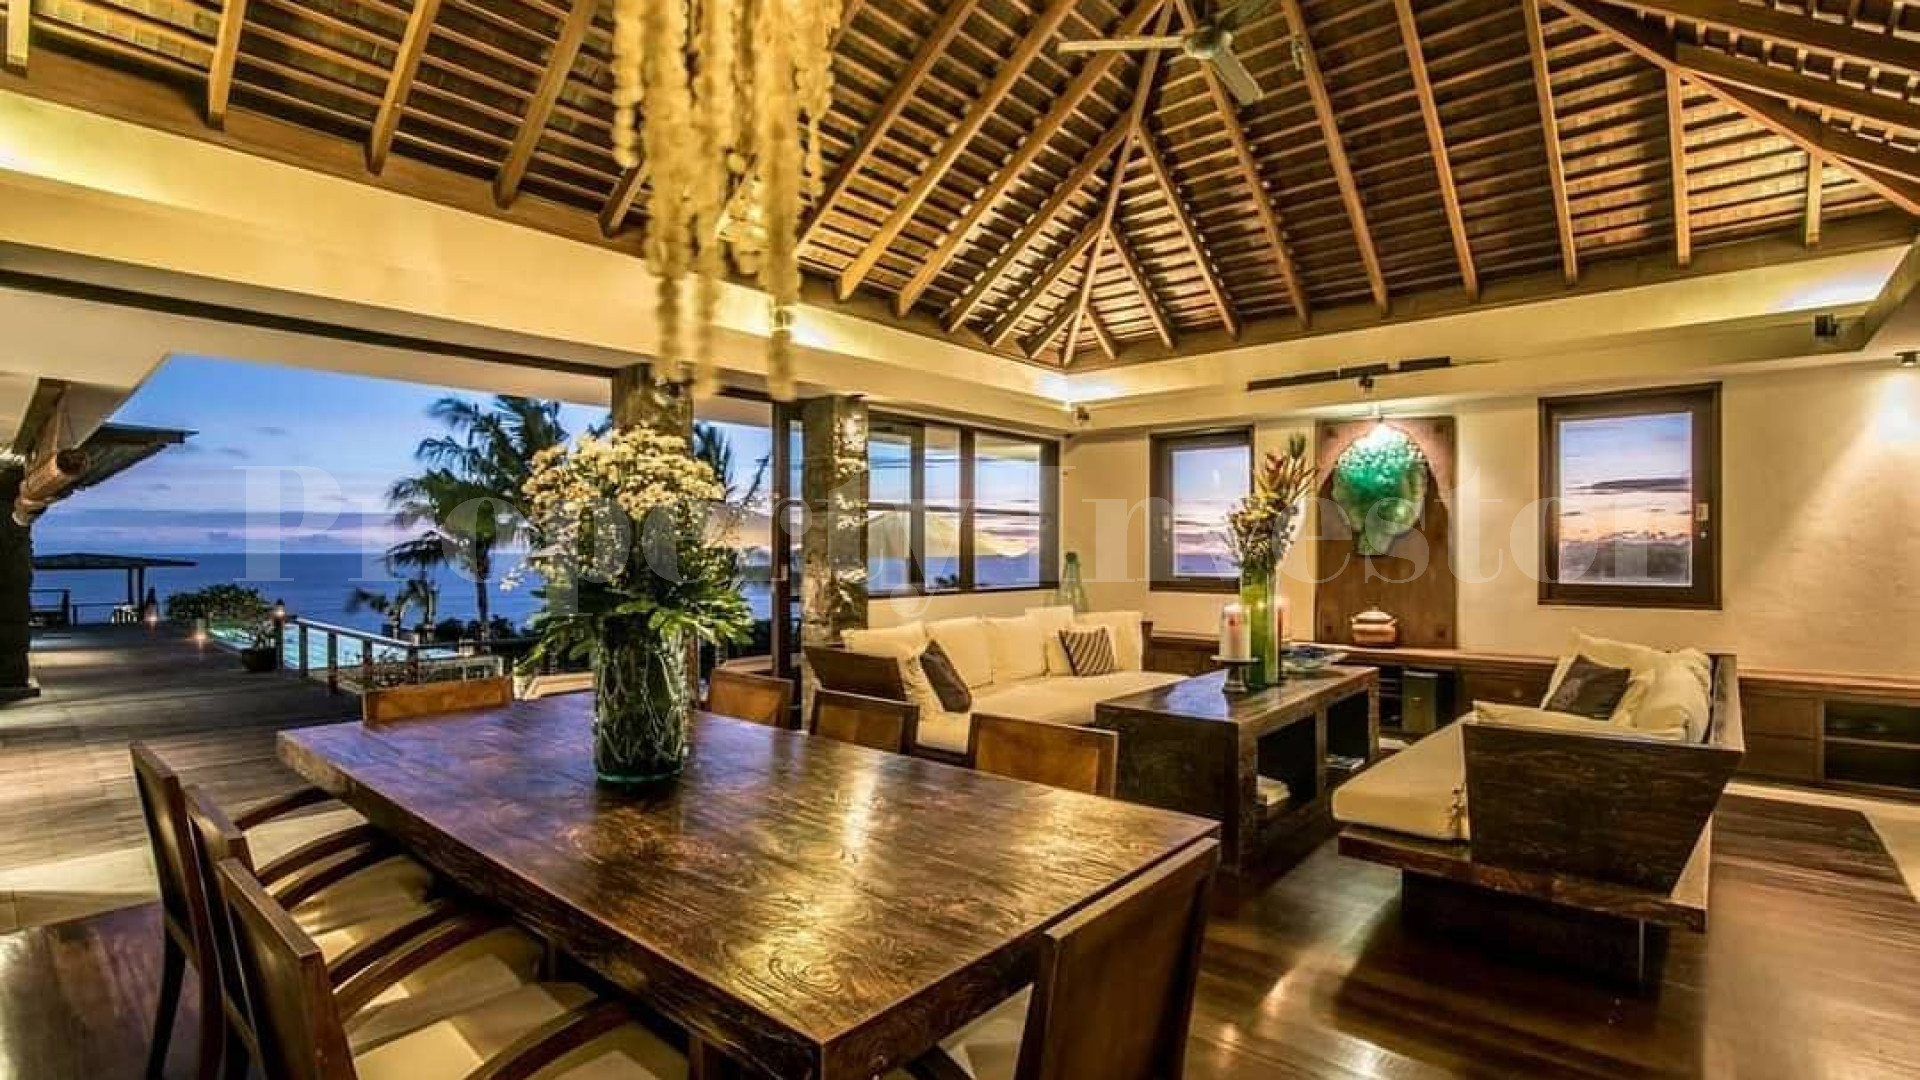 Incredible 3 Bedroom Luxury Clifftop Oceanview Villa with Private Beach Access for Sale in Uluwatu, Bali